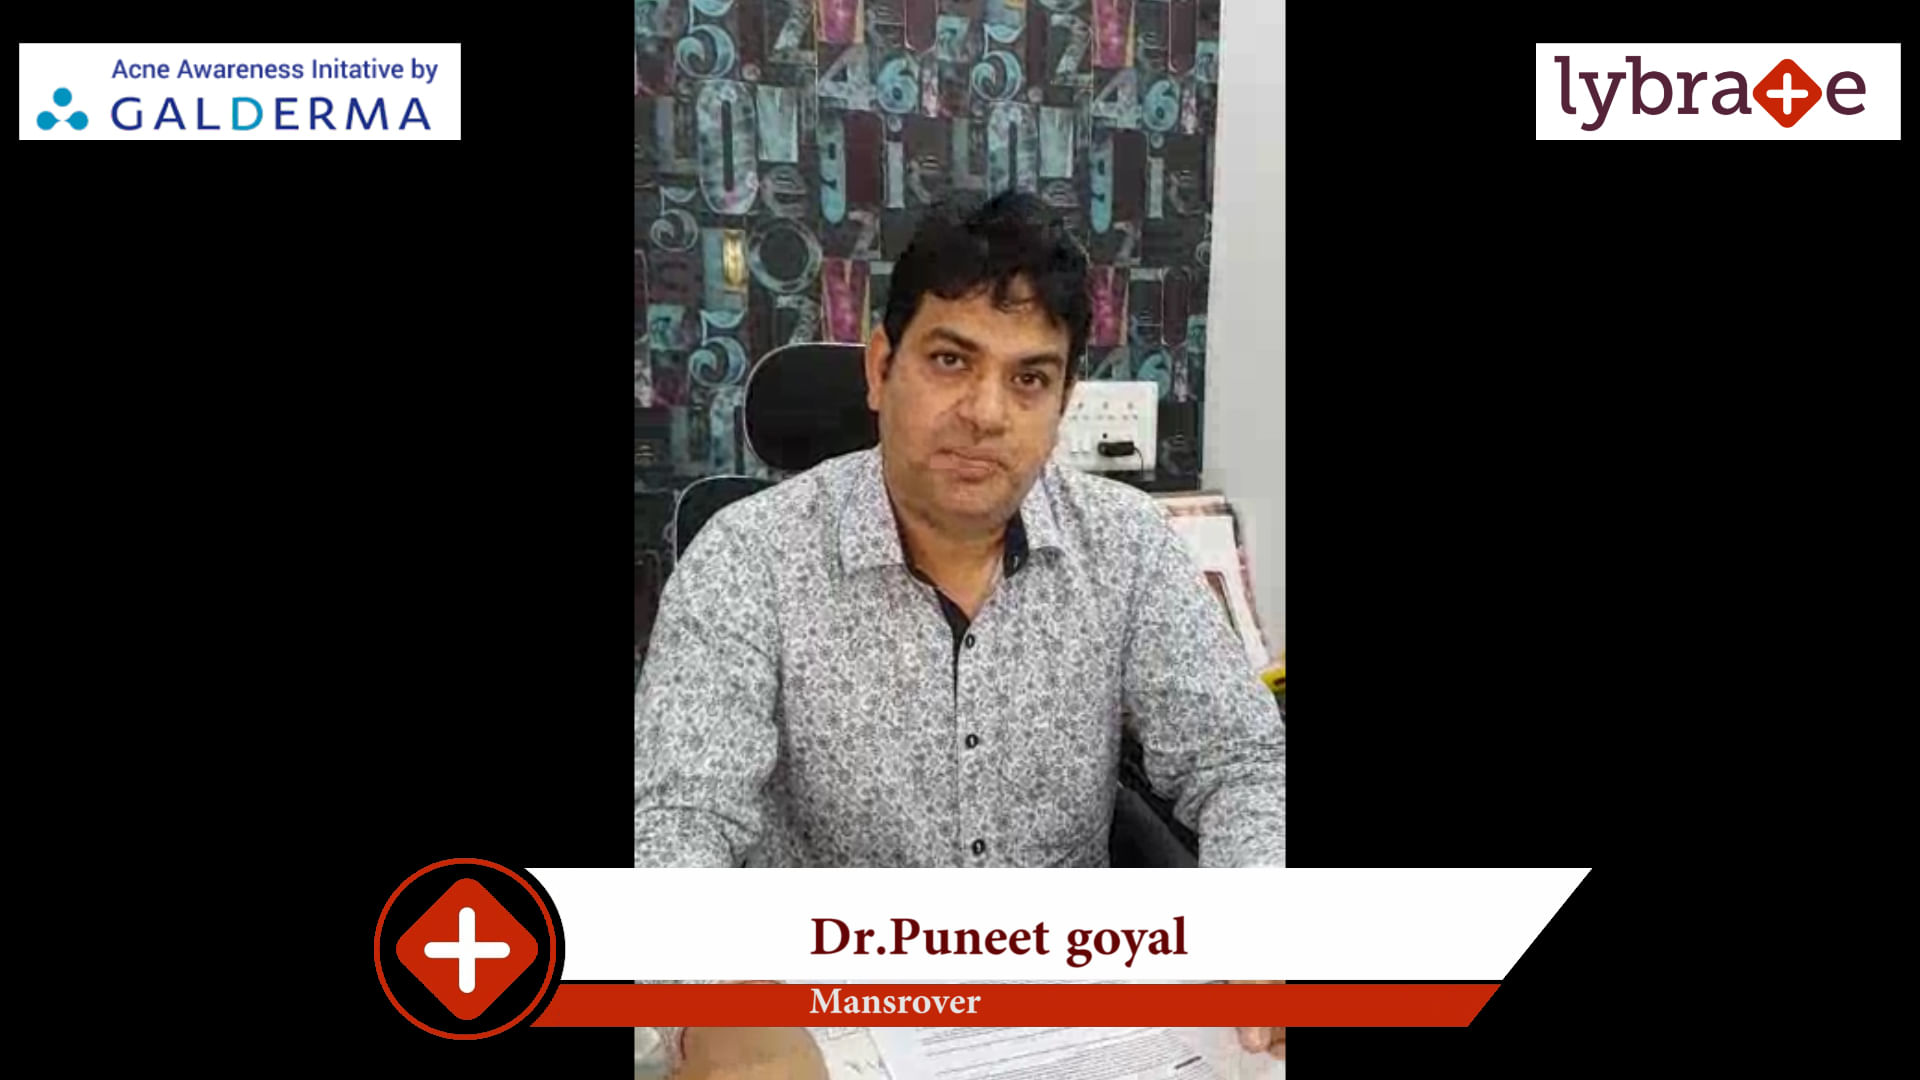 Lybrate | Dr. Puneet goyal speaks on IMPORTANCE OF TREATING ACNE EARLY